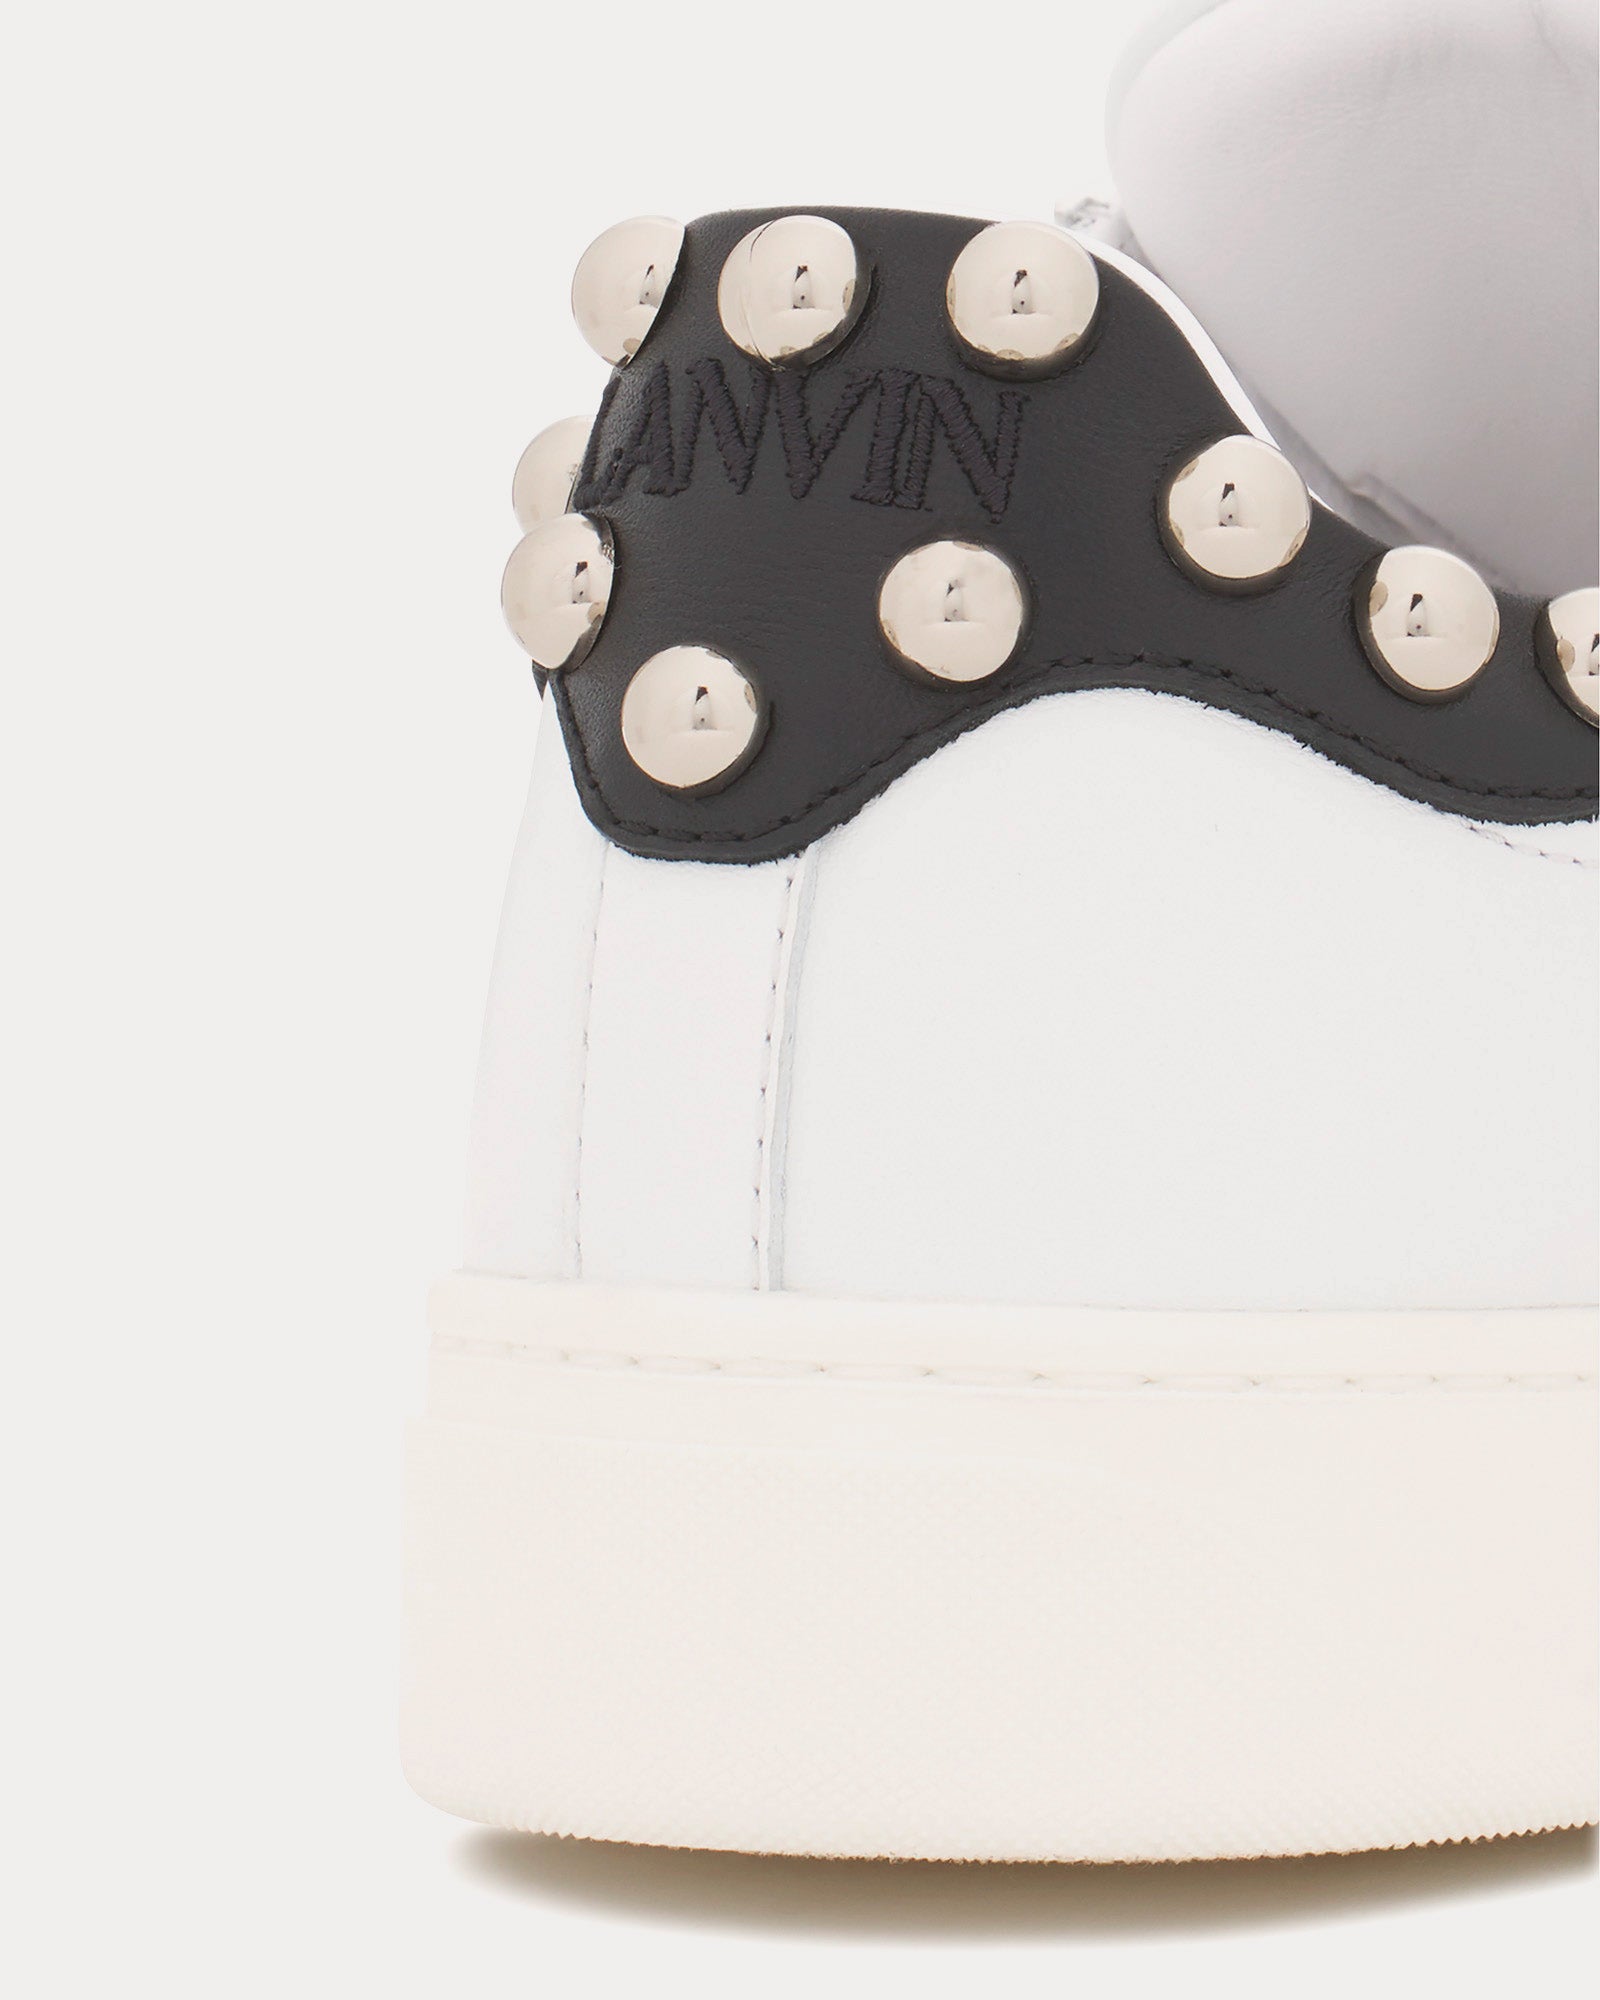 Lanvin - DDBO Studded Leather White / Silver Low Top Sneakers